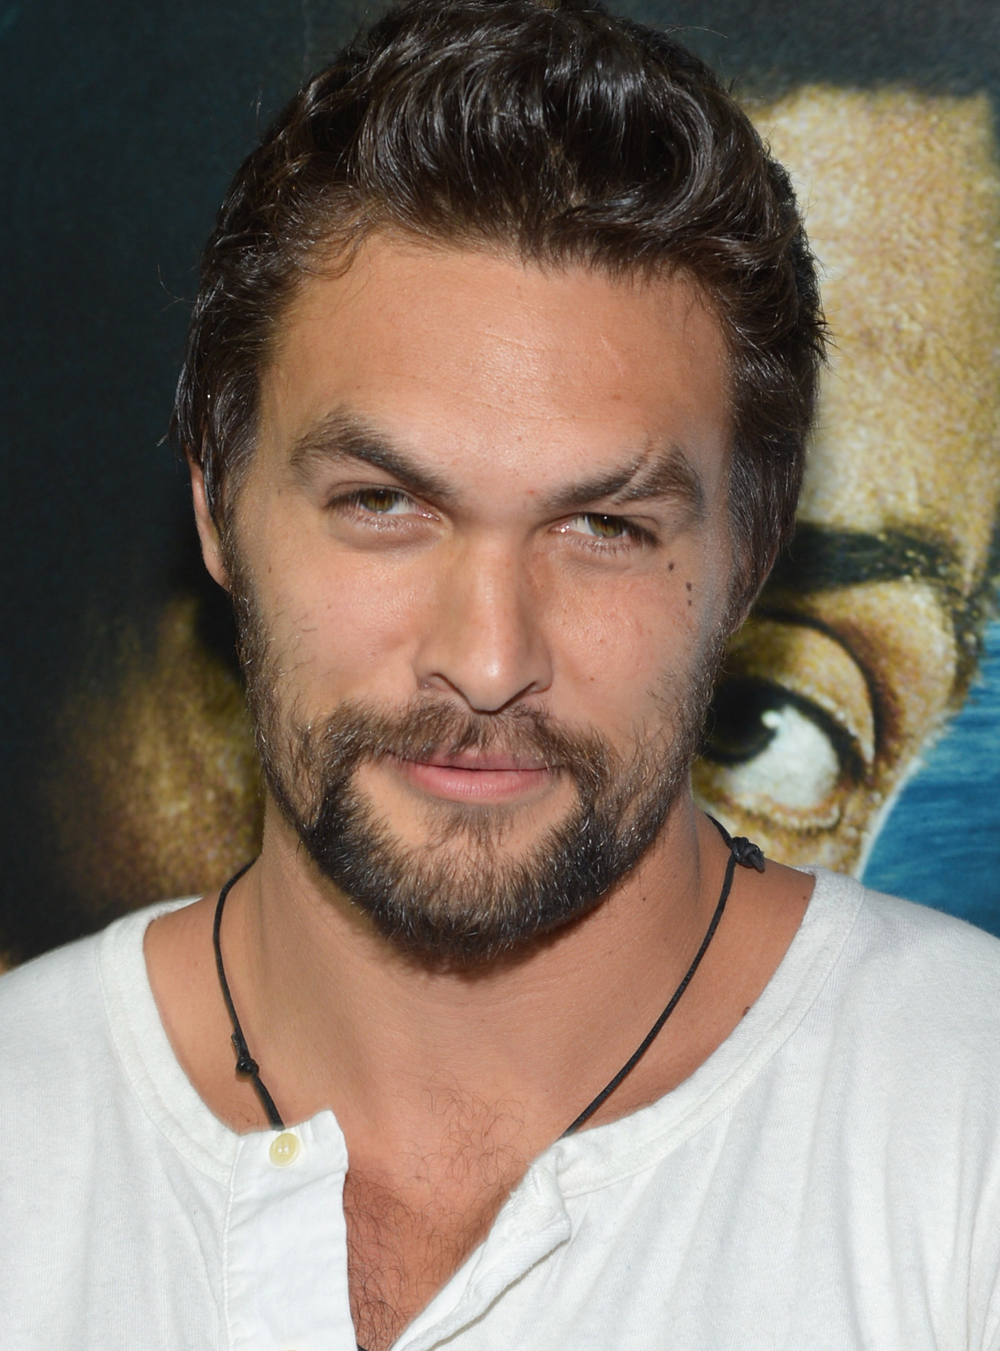 JASON MOMOA Hair with Short Haircut or Long Hair? Pictures Inside